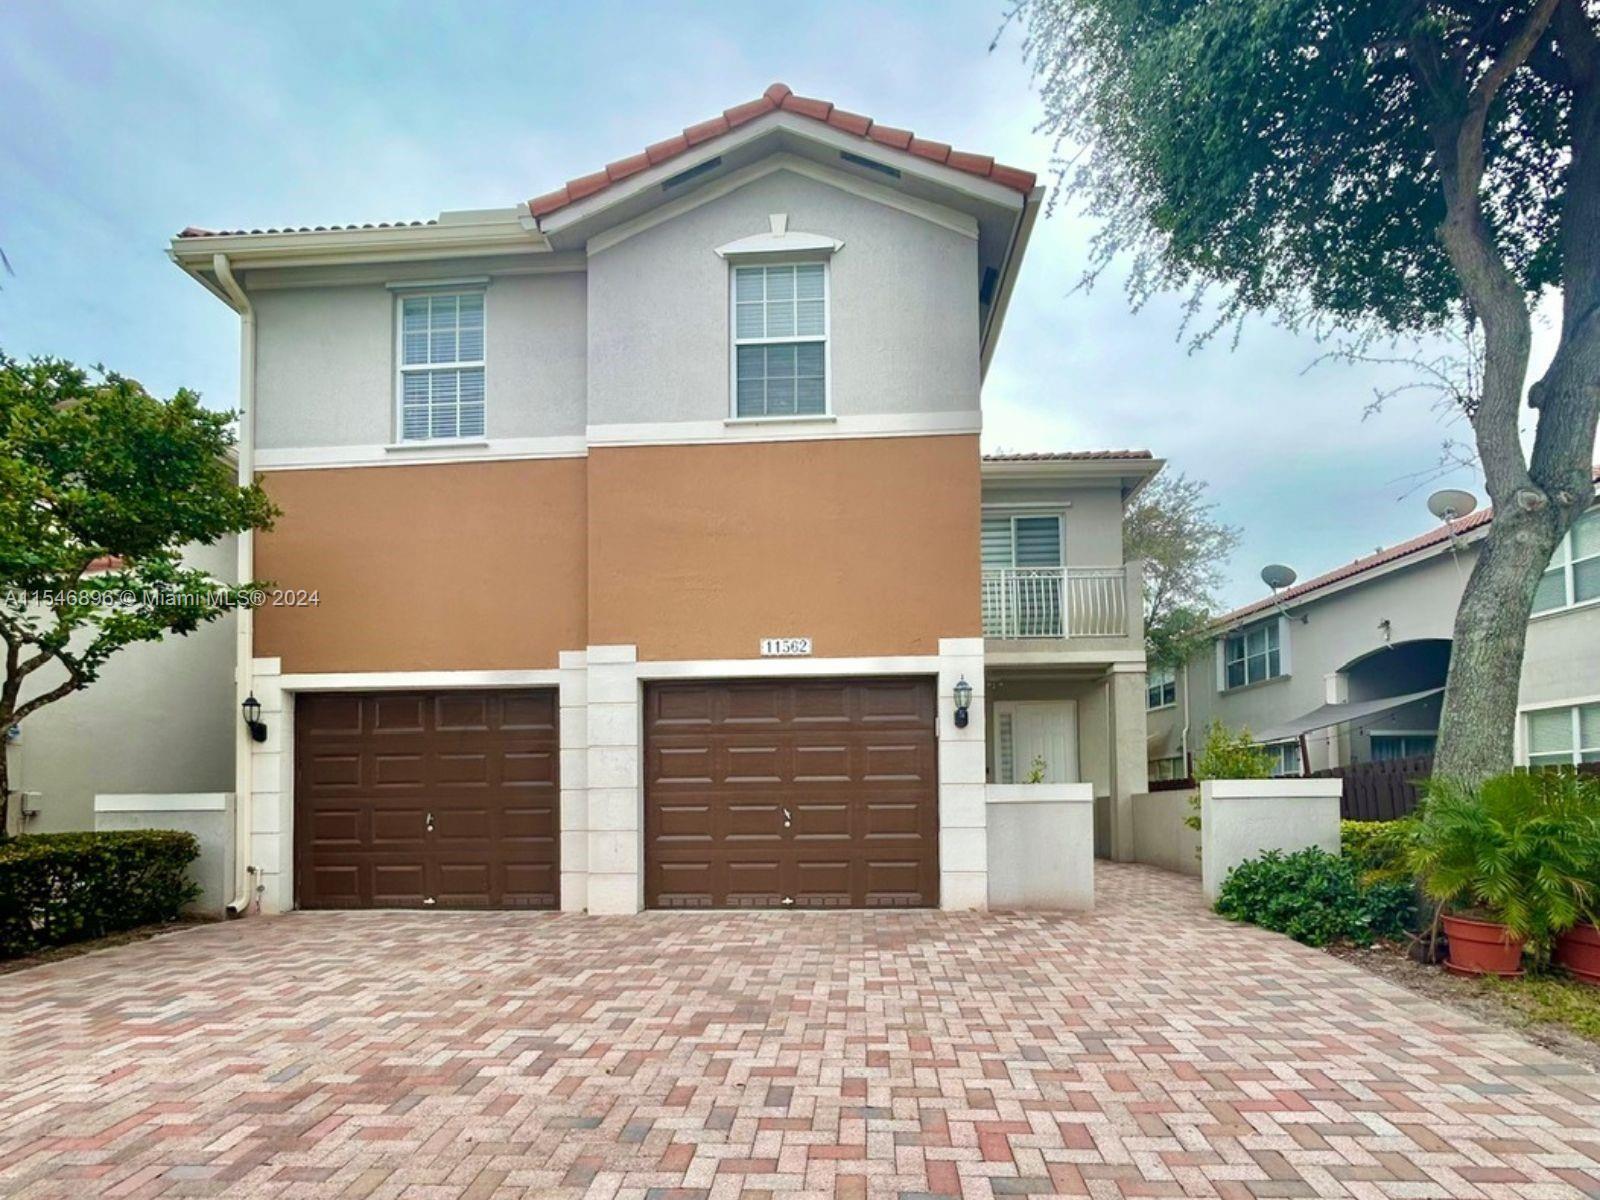 Photo of 11562 NW 80th St #11562 in Doral, FL